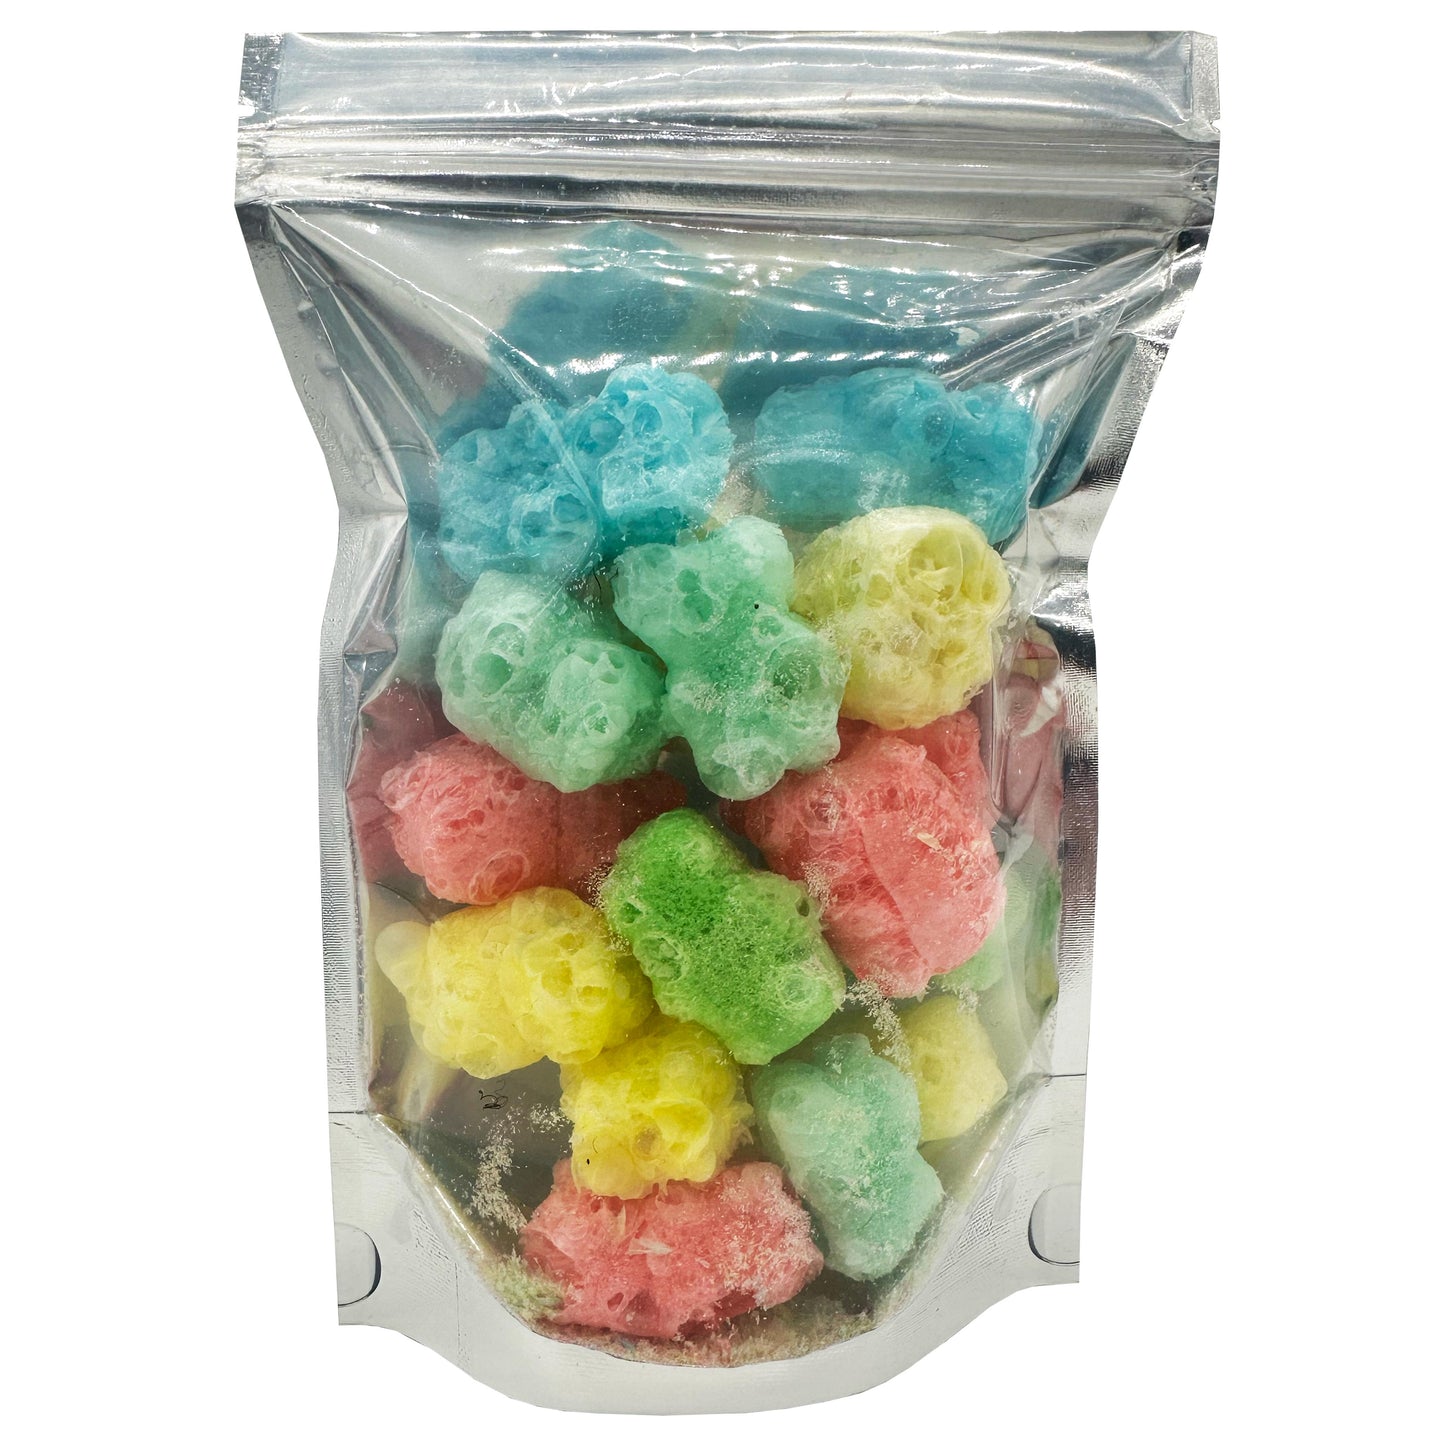 Freeze Dried Candy Gummy Bears Variety Pack Crunchy Treats – Space Theme Party Favor Gift Idea, 2 oz